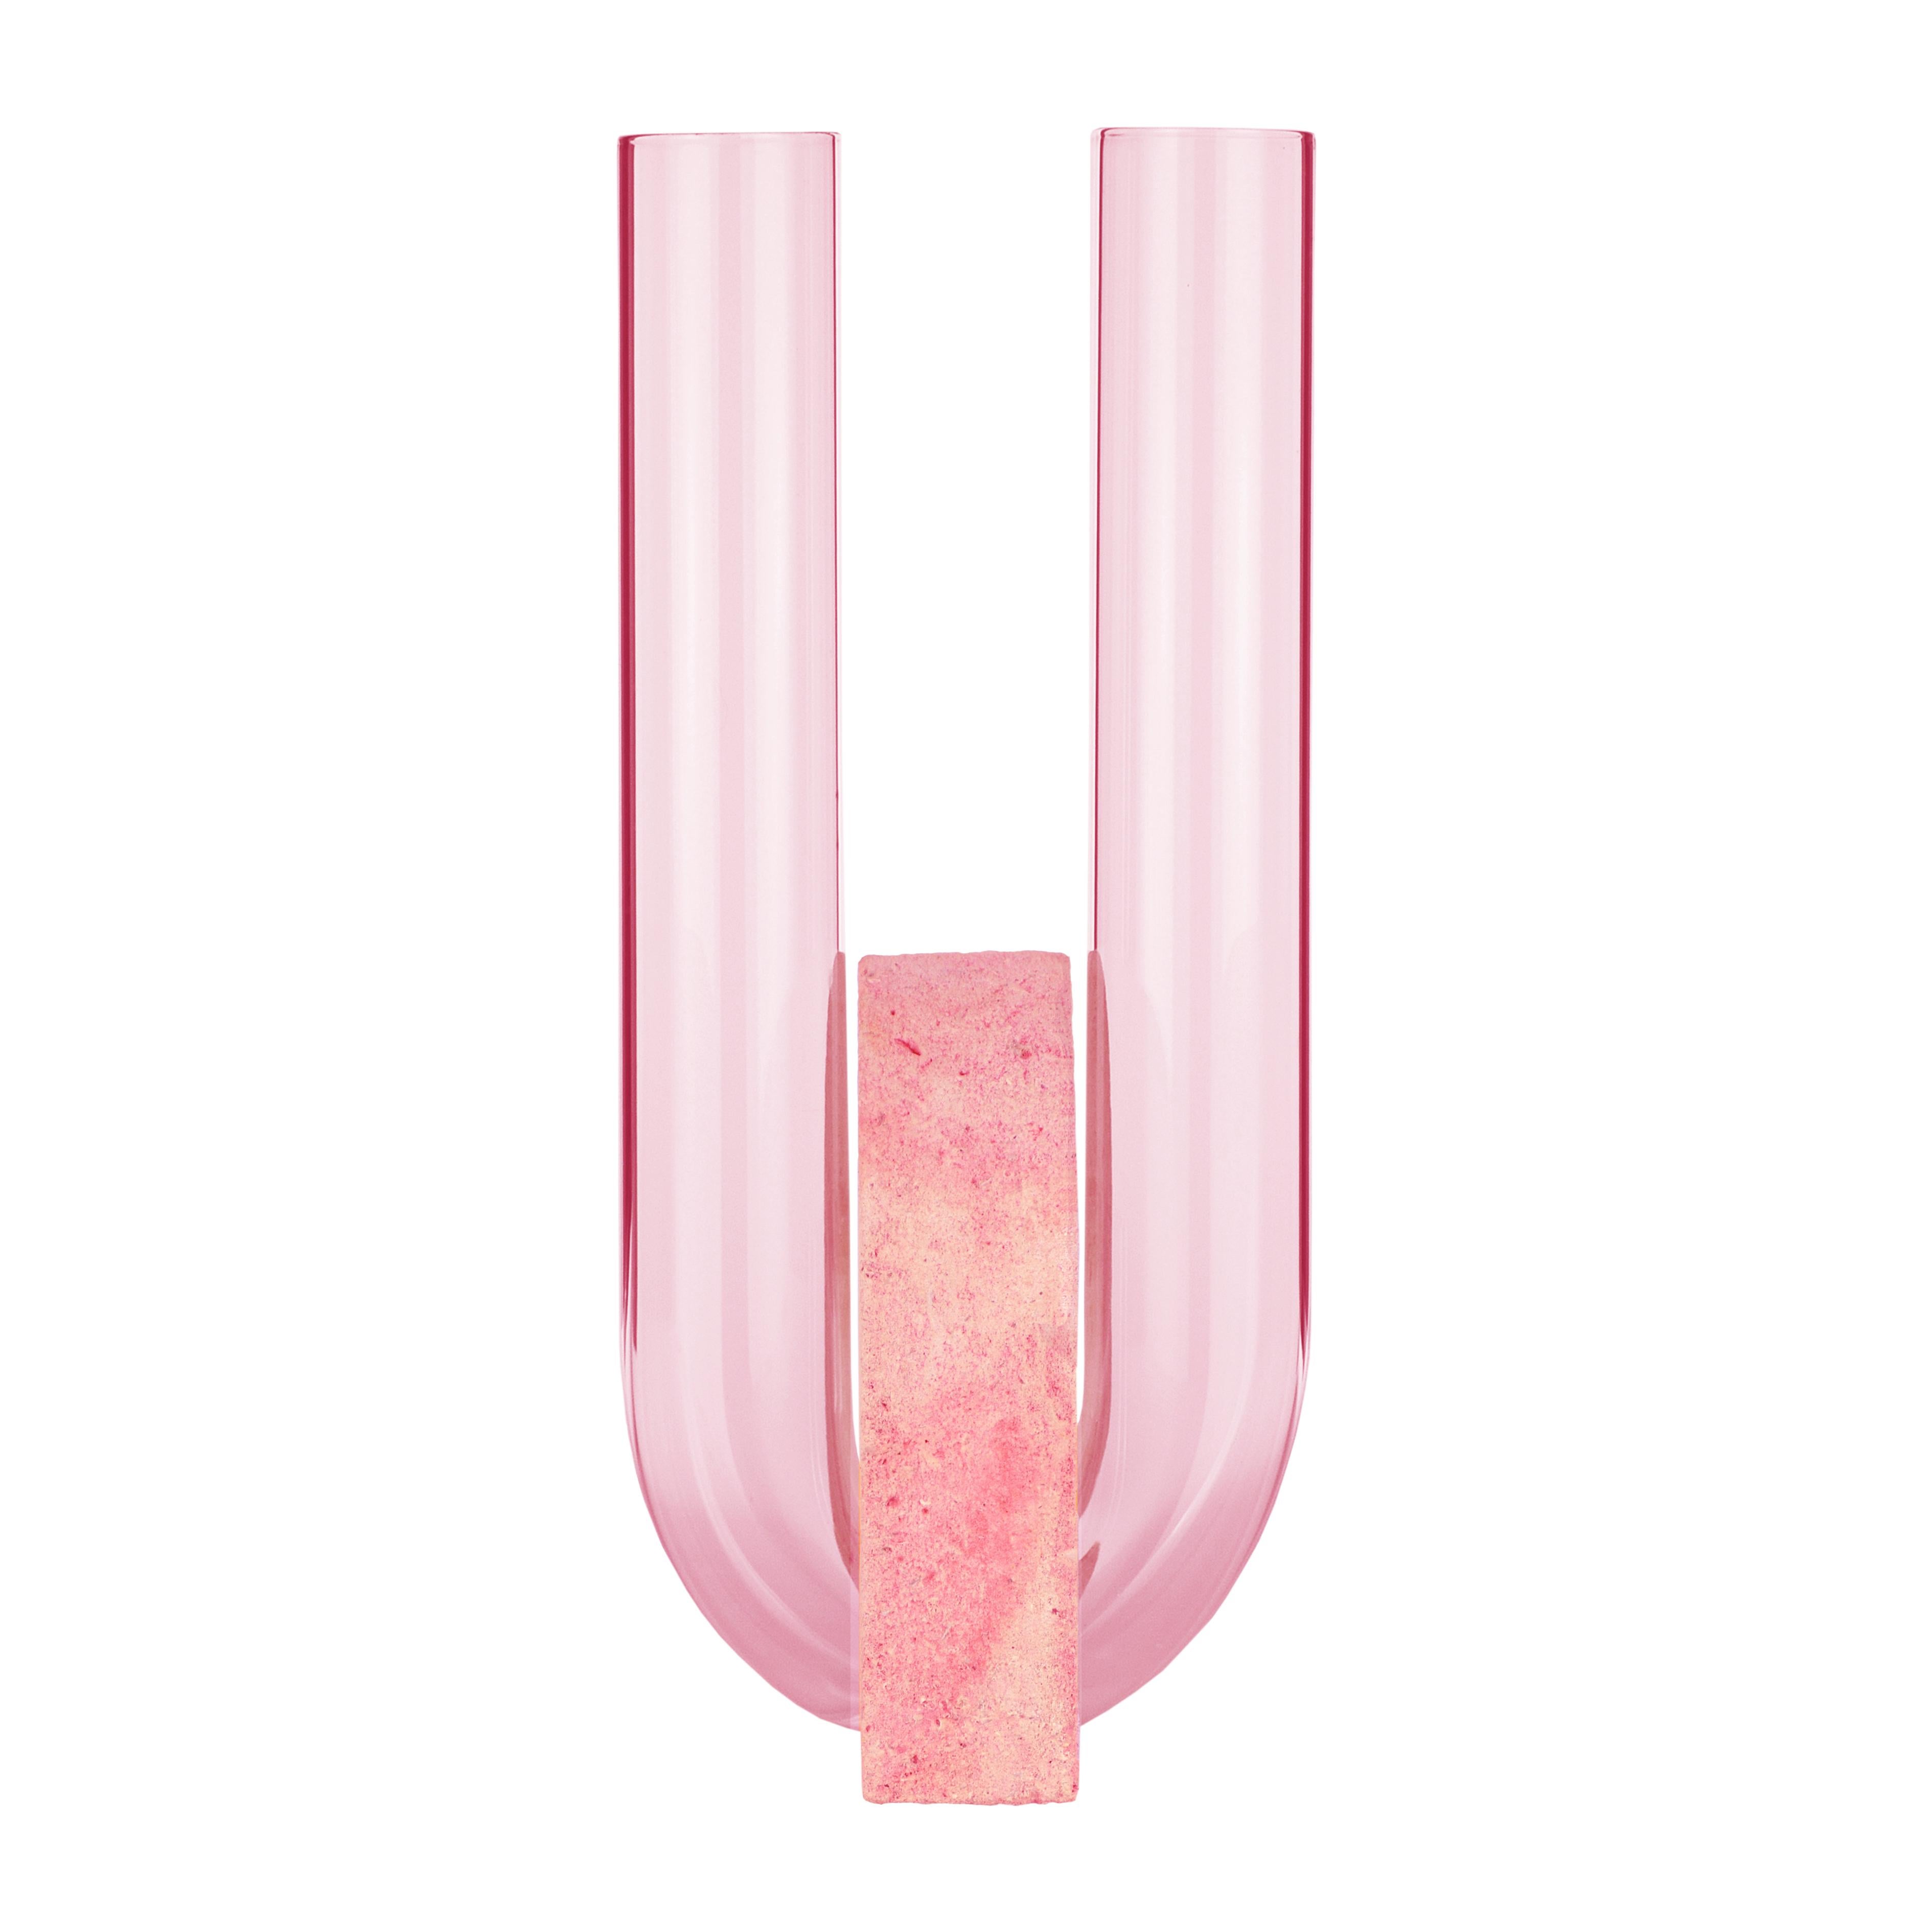 Pink-Pink Cochlea Della Liberazione soils edition vase by Coki Barbieri
Dimensions: W 14 x D 14 x H 30 cm.
Materials: Handcrafted stone made with Matera stone fragments, sedimentary rocks of the Italian Apennines and pure water, pink mineral